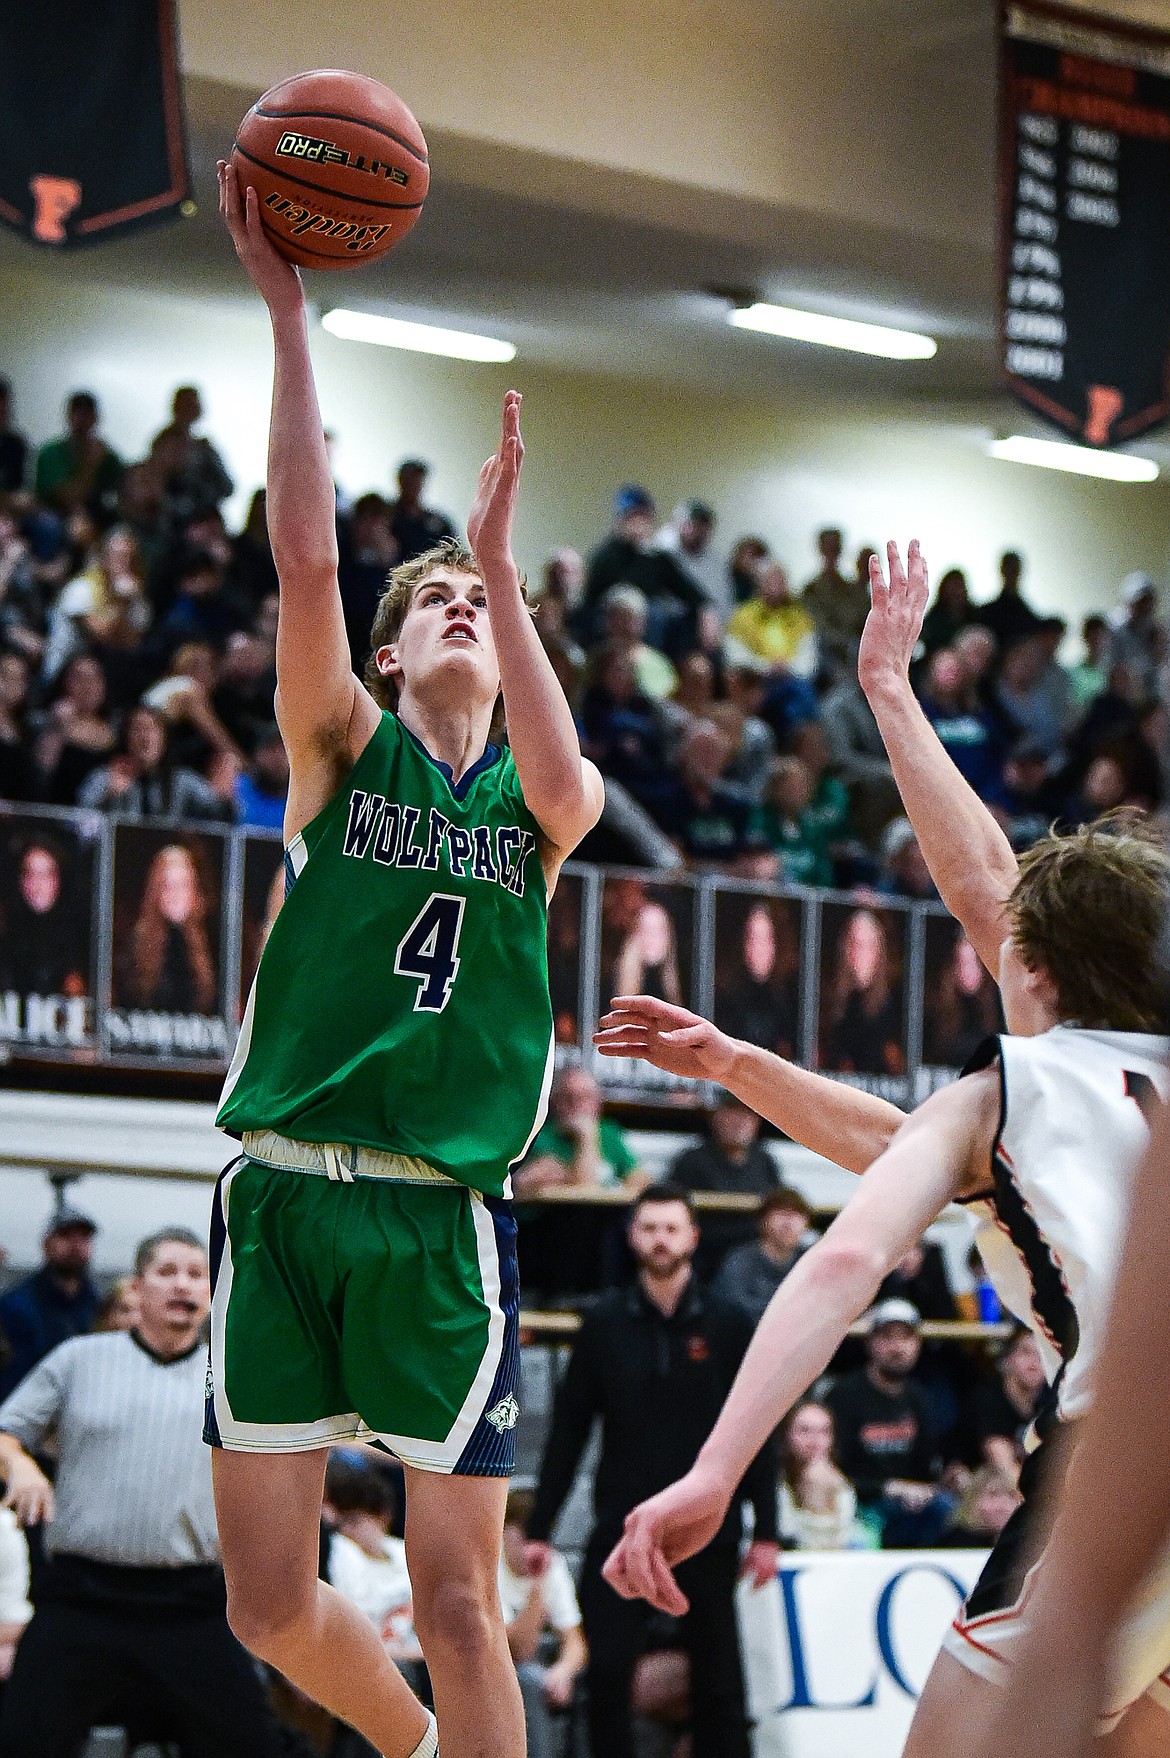 Glacier's Owen Henry (4) drives to the basket in the first half against Flathead at Flathead High School on Friday, Jan. 19. (Casey Kreider/Daily Inter Lake)